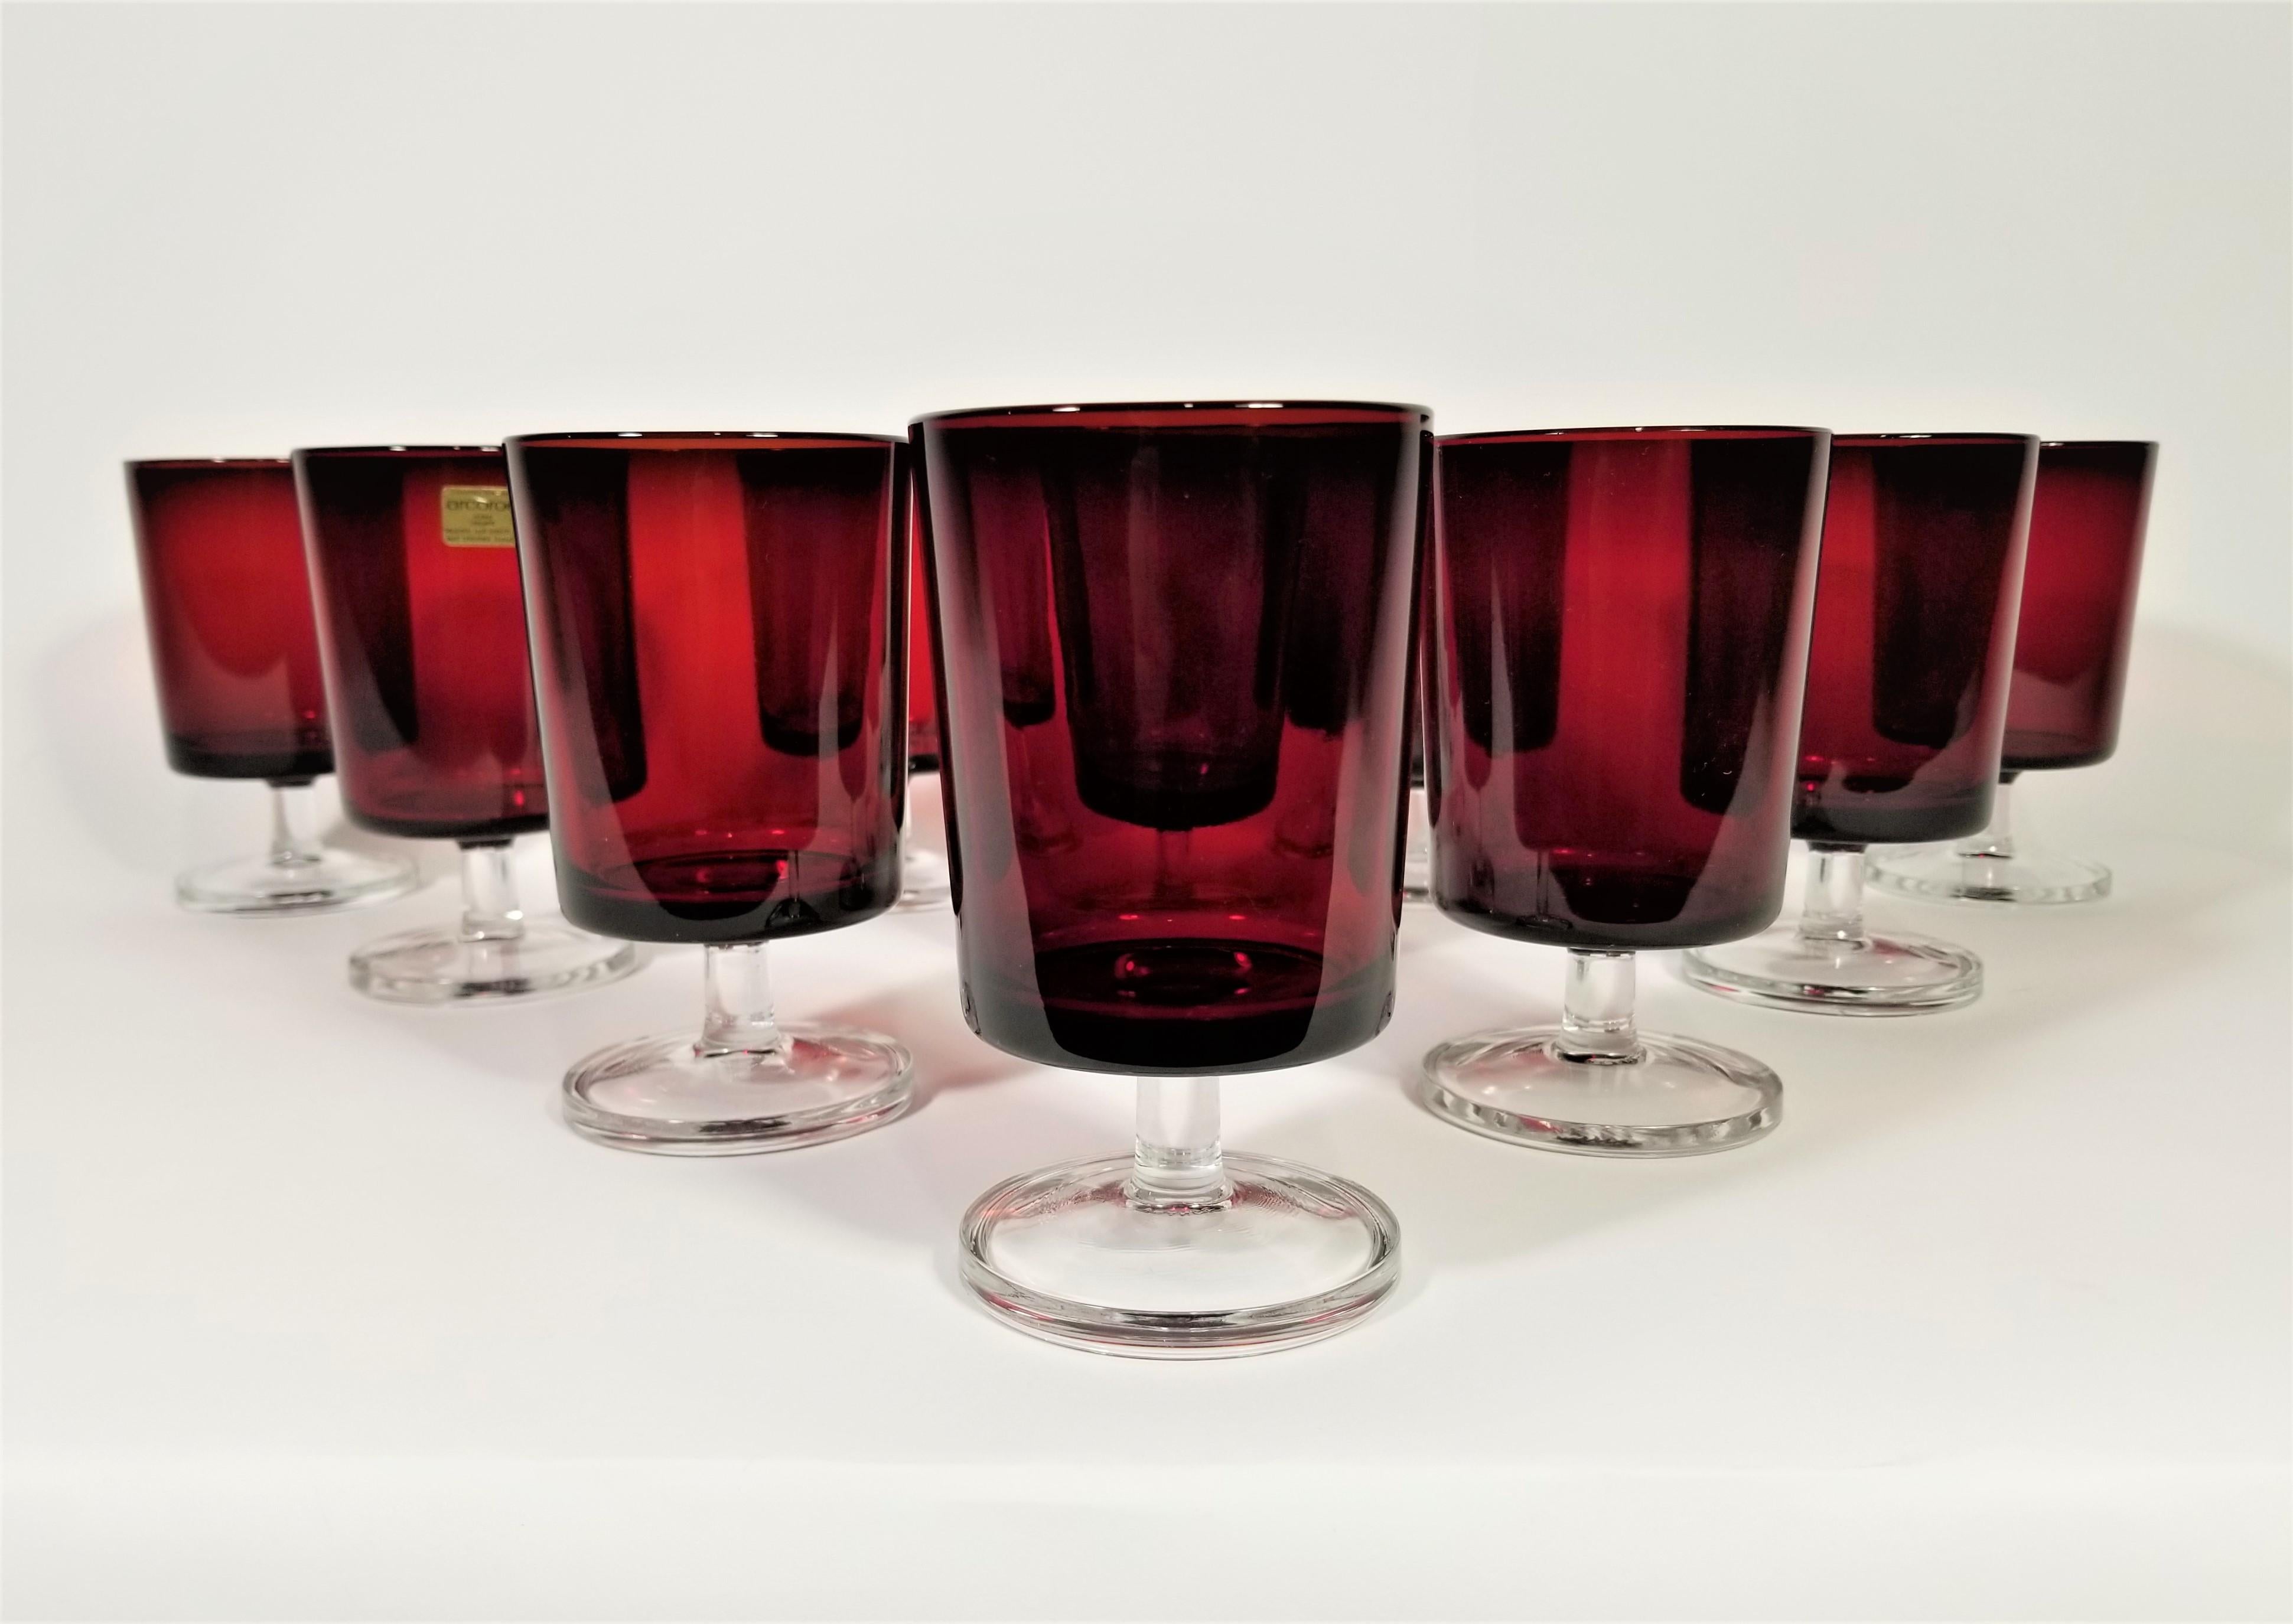 Set of 10 midcentury 1960s French Arcoroc stemware glassware barware. Ruby red with clear stem, all glasses marked France on bottom. Some still retain original marking stickers. Elegant addition to any table or bar.